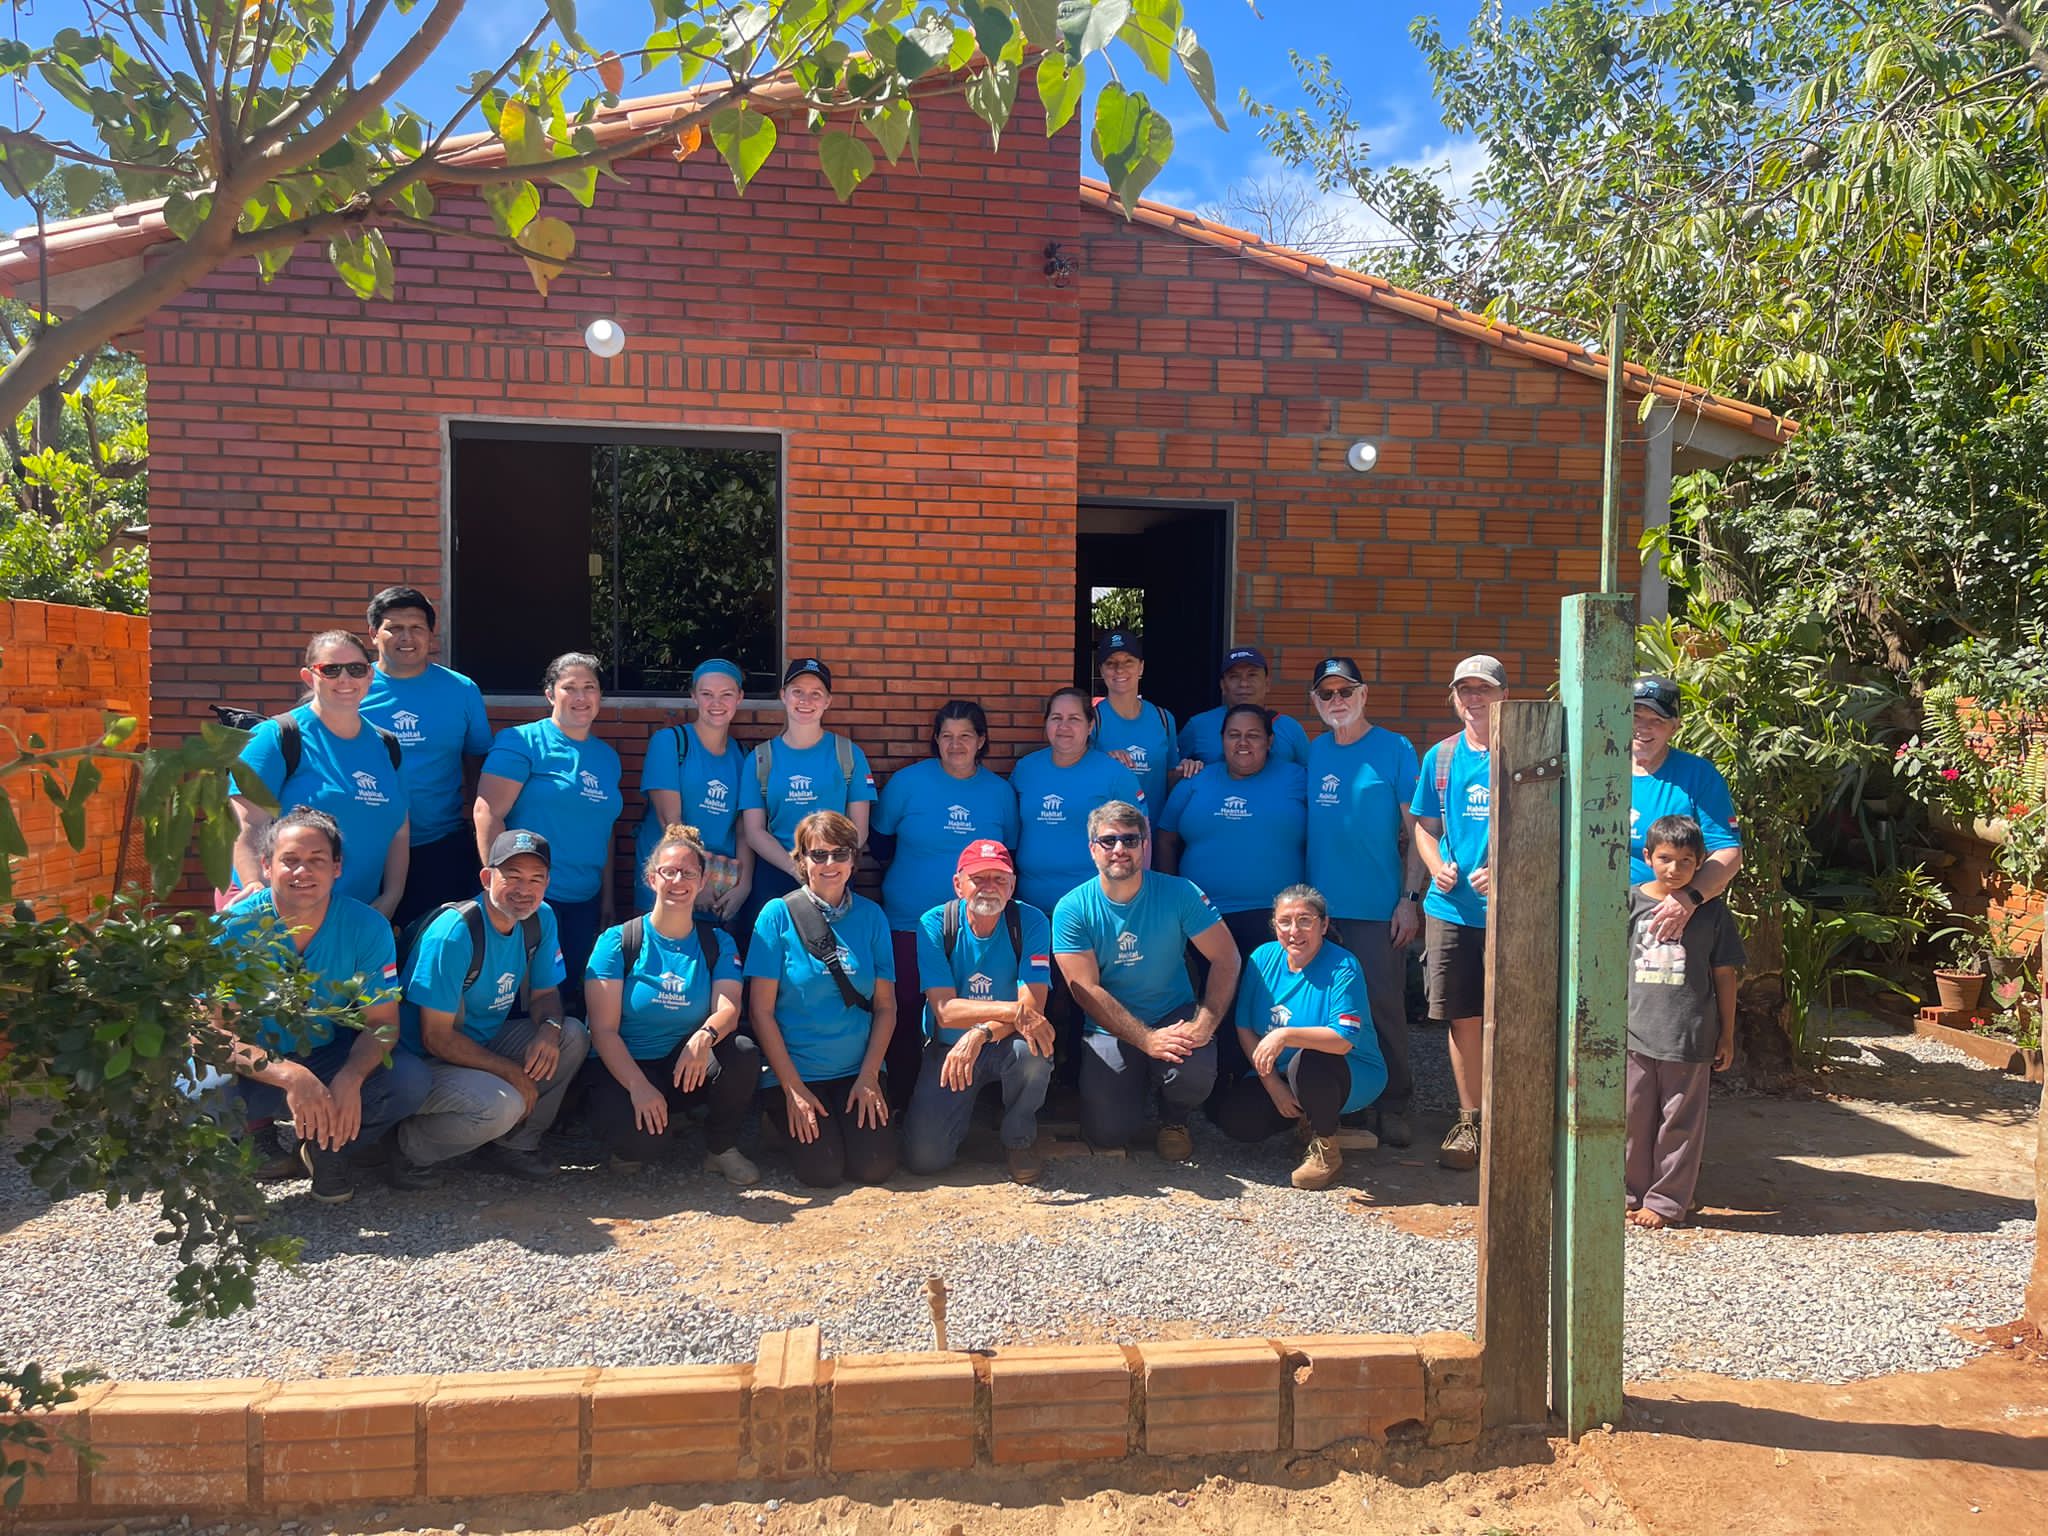 Volunteers pose in front of the home they helped build.